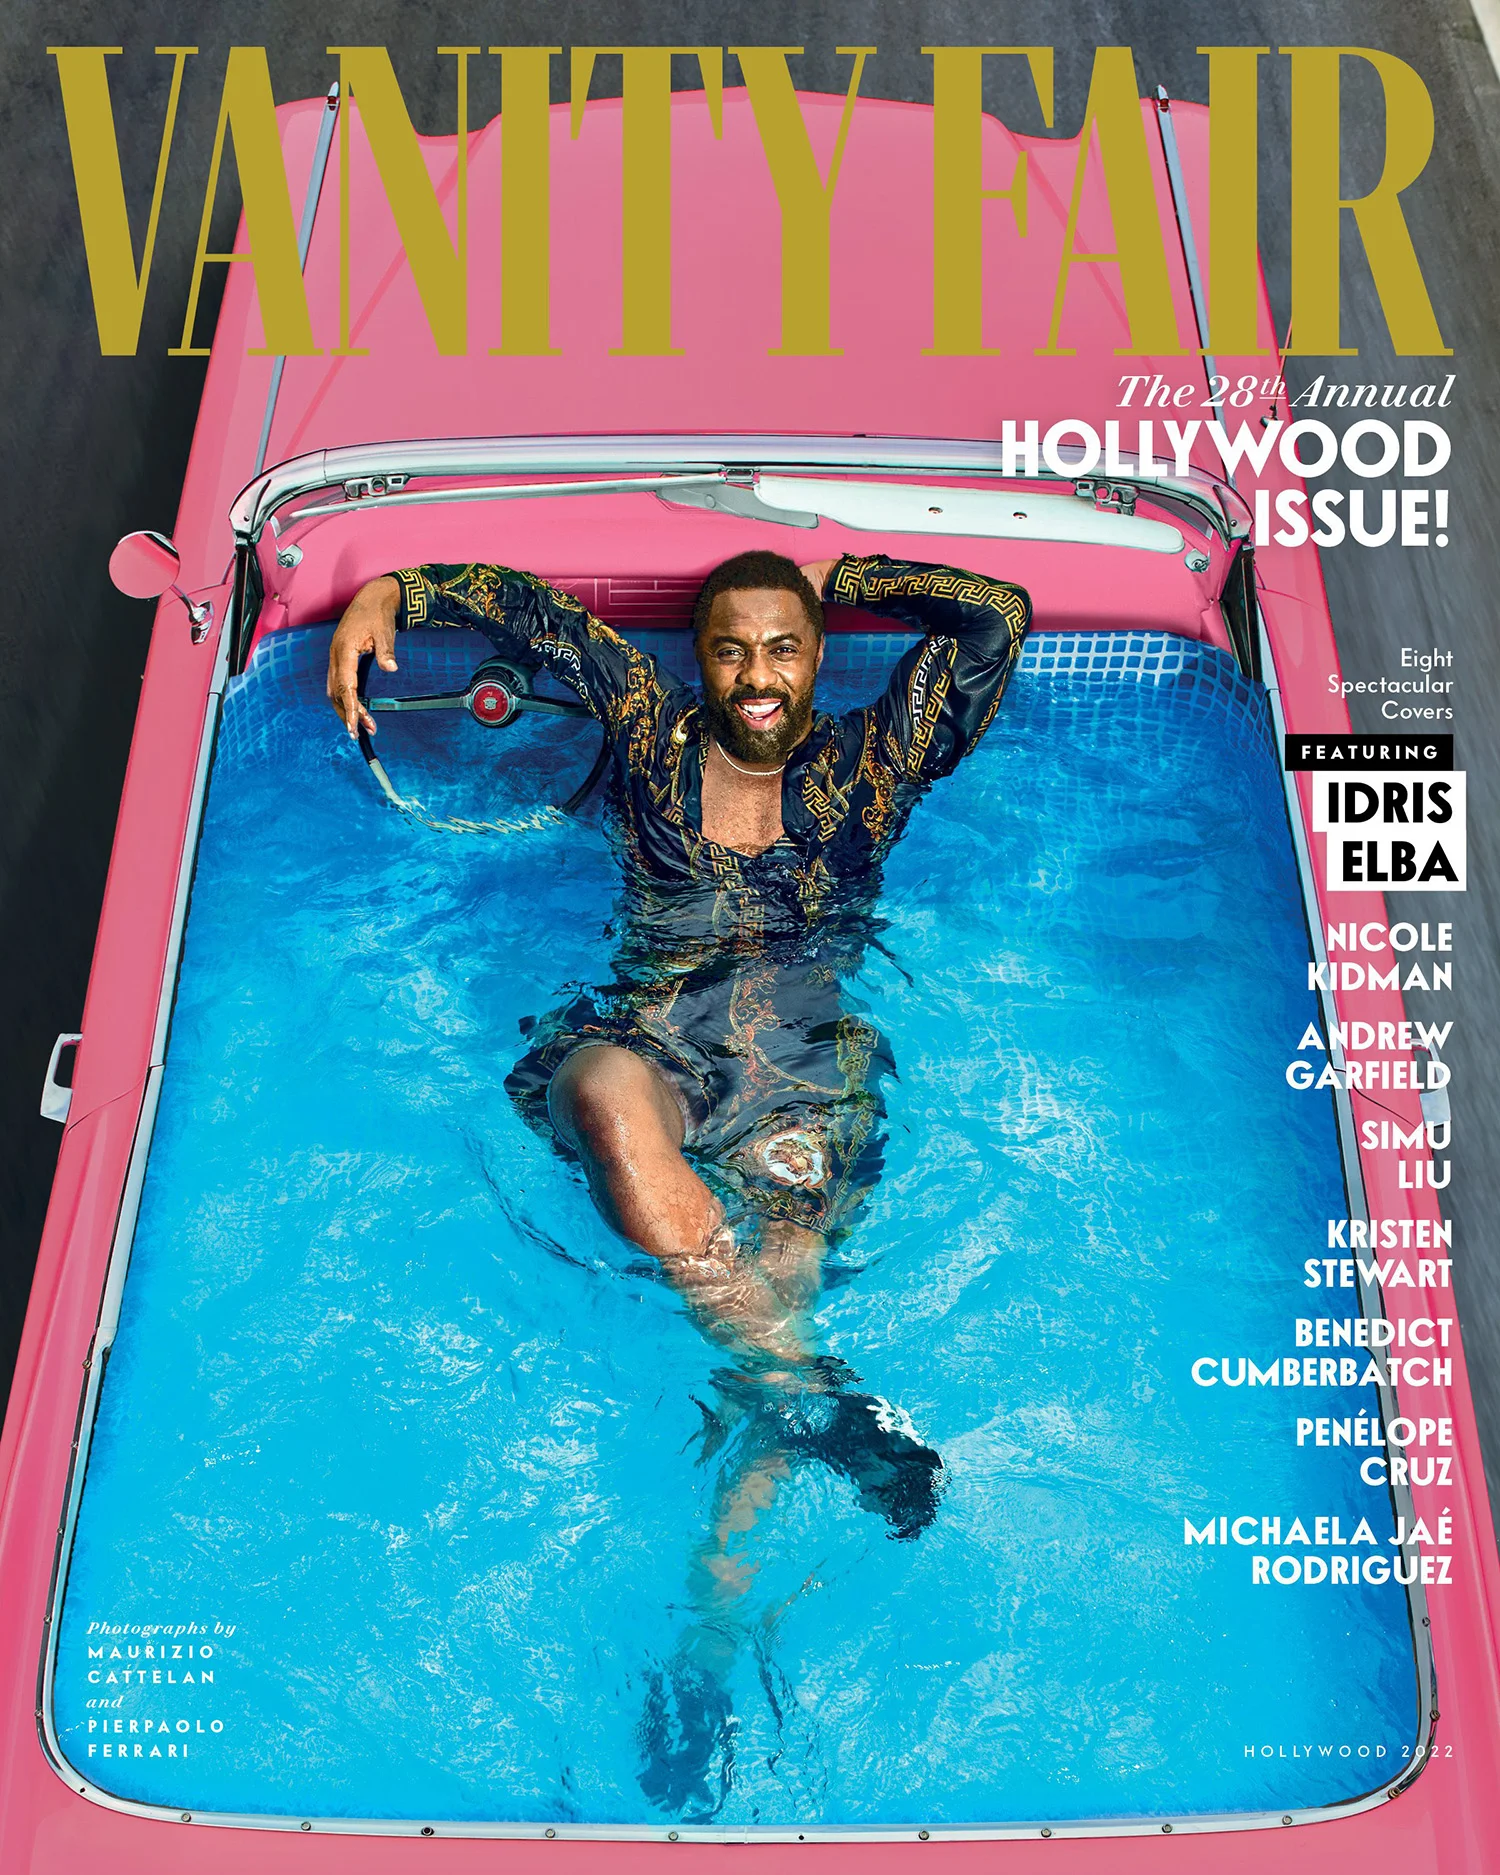 Vanity Fair March 2022 ‘’Hollywood Issue’’ covers by Maurizio Cattelan & Pierpaolo Ferrari